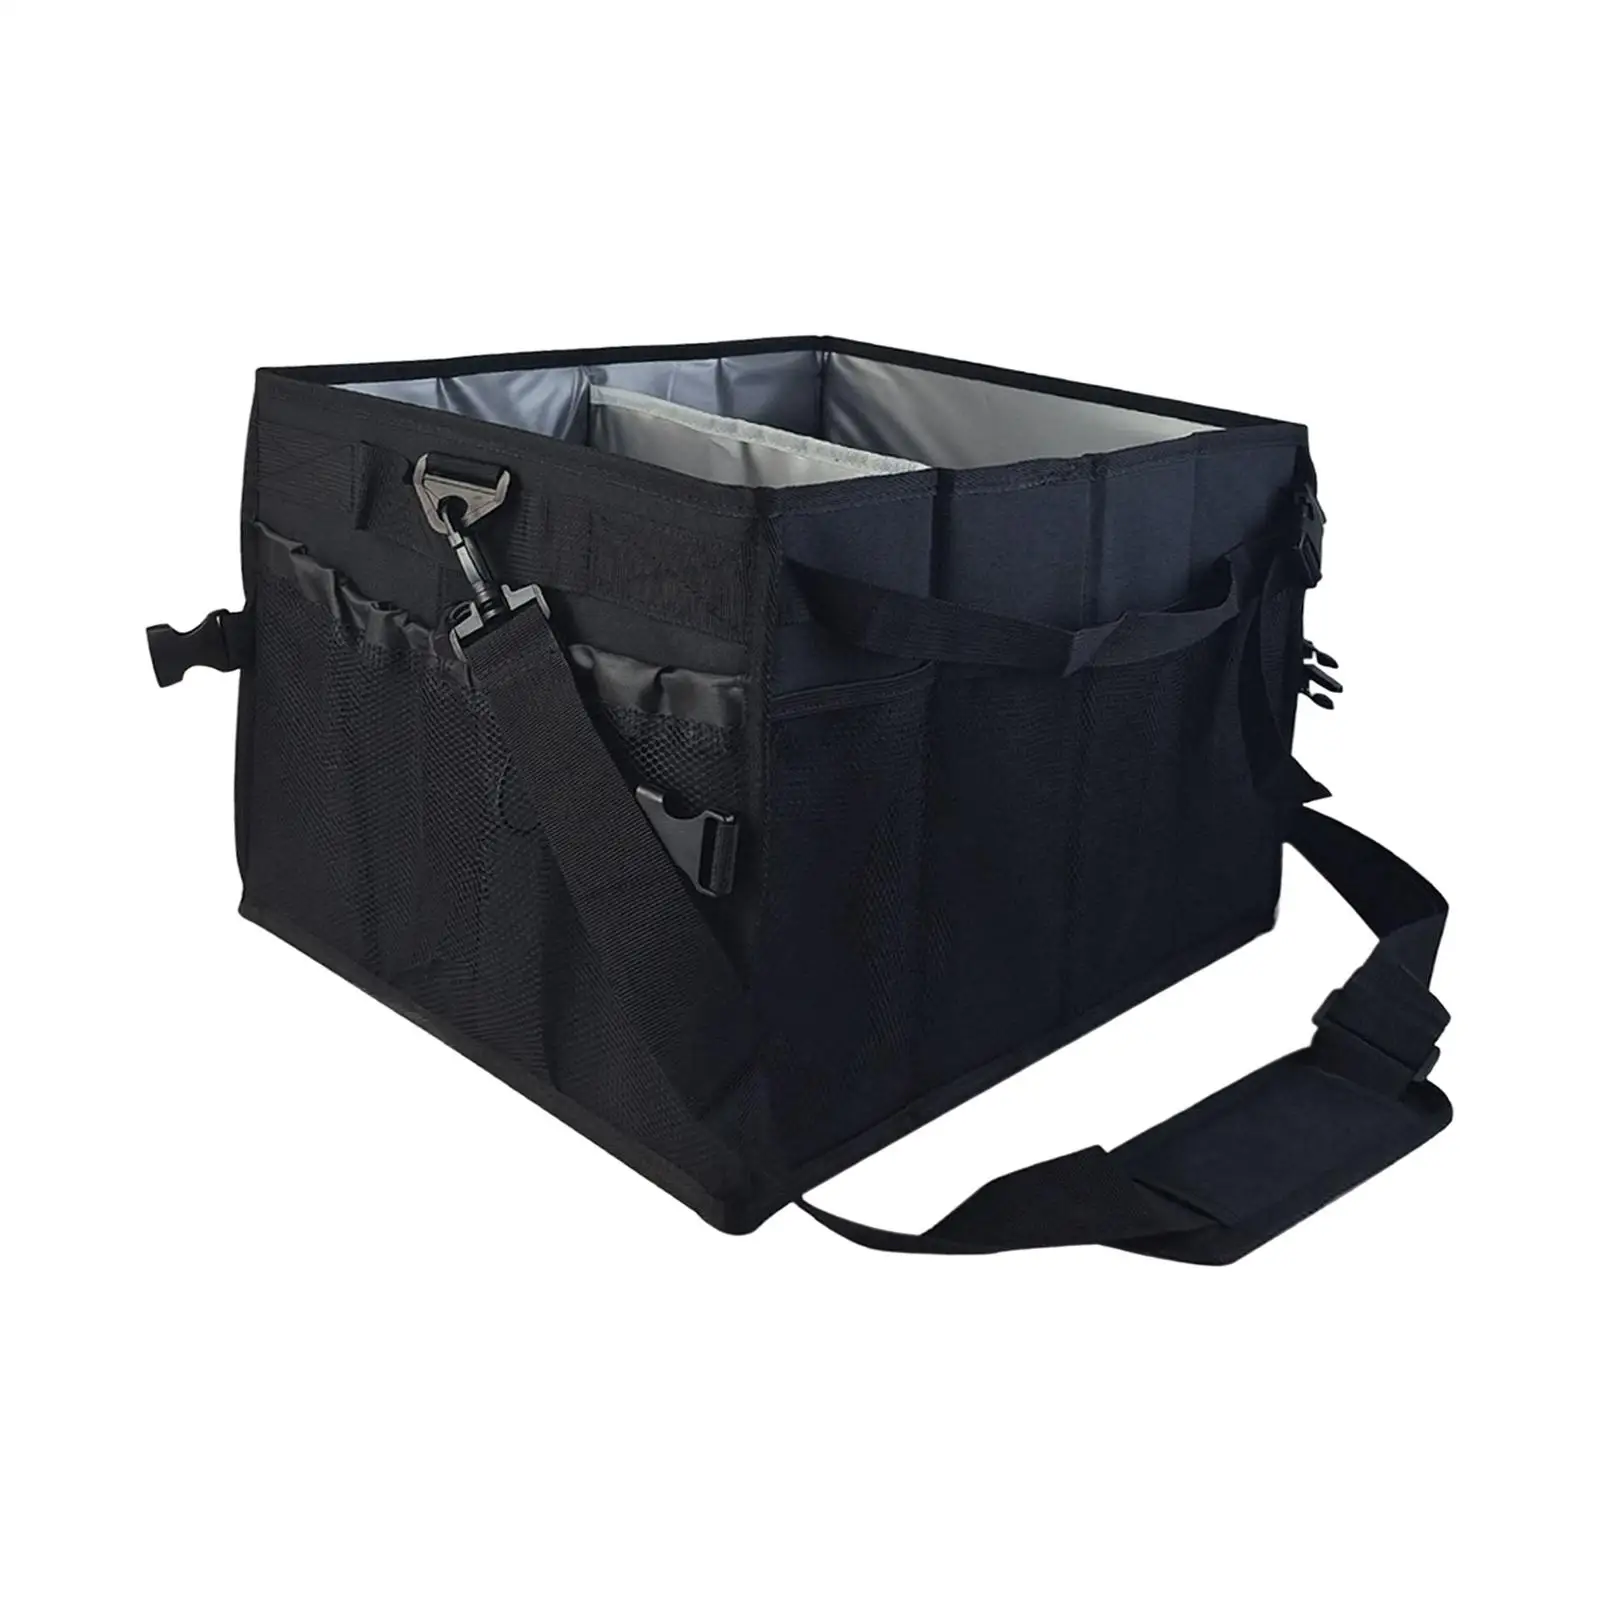 Portable BBQ Tool Storage Bag Organizer Grill Tool Carrying Bag Barbecue